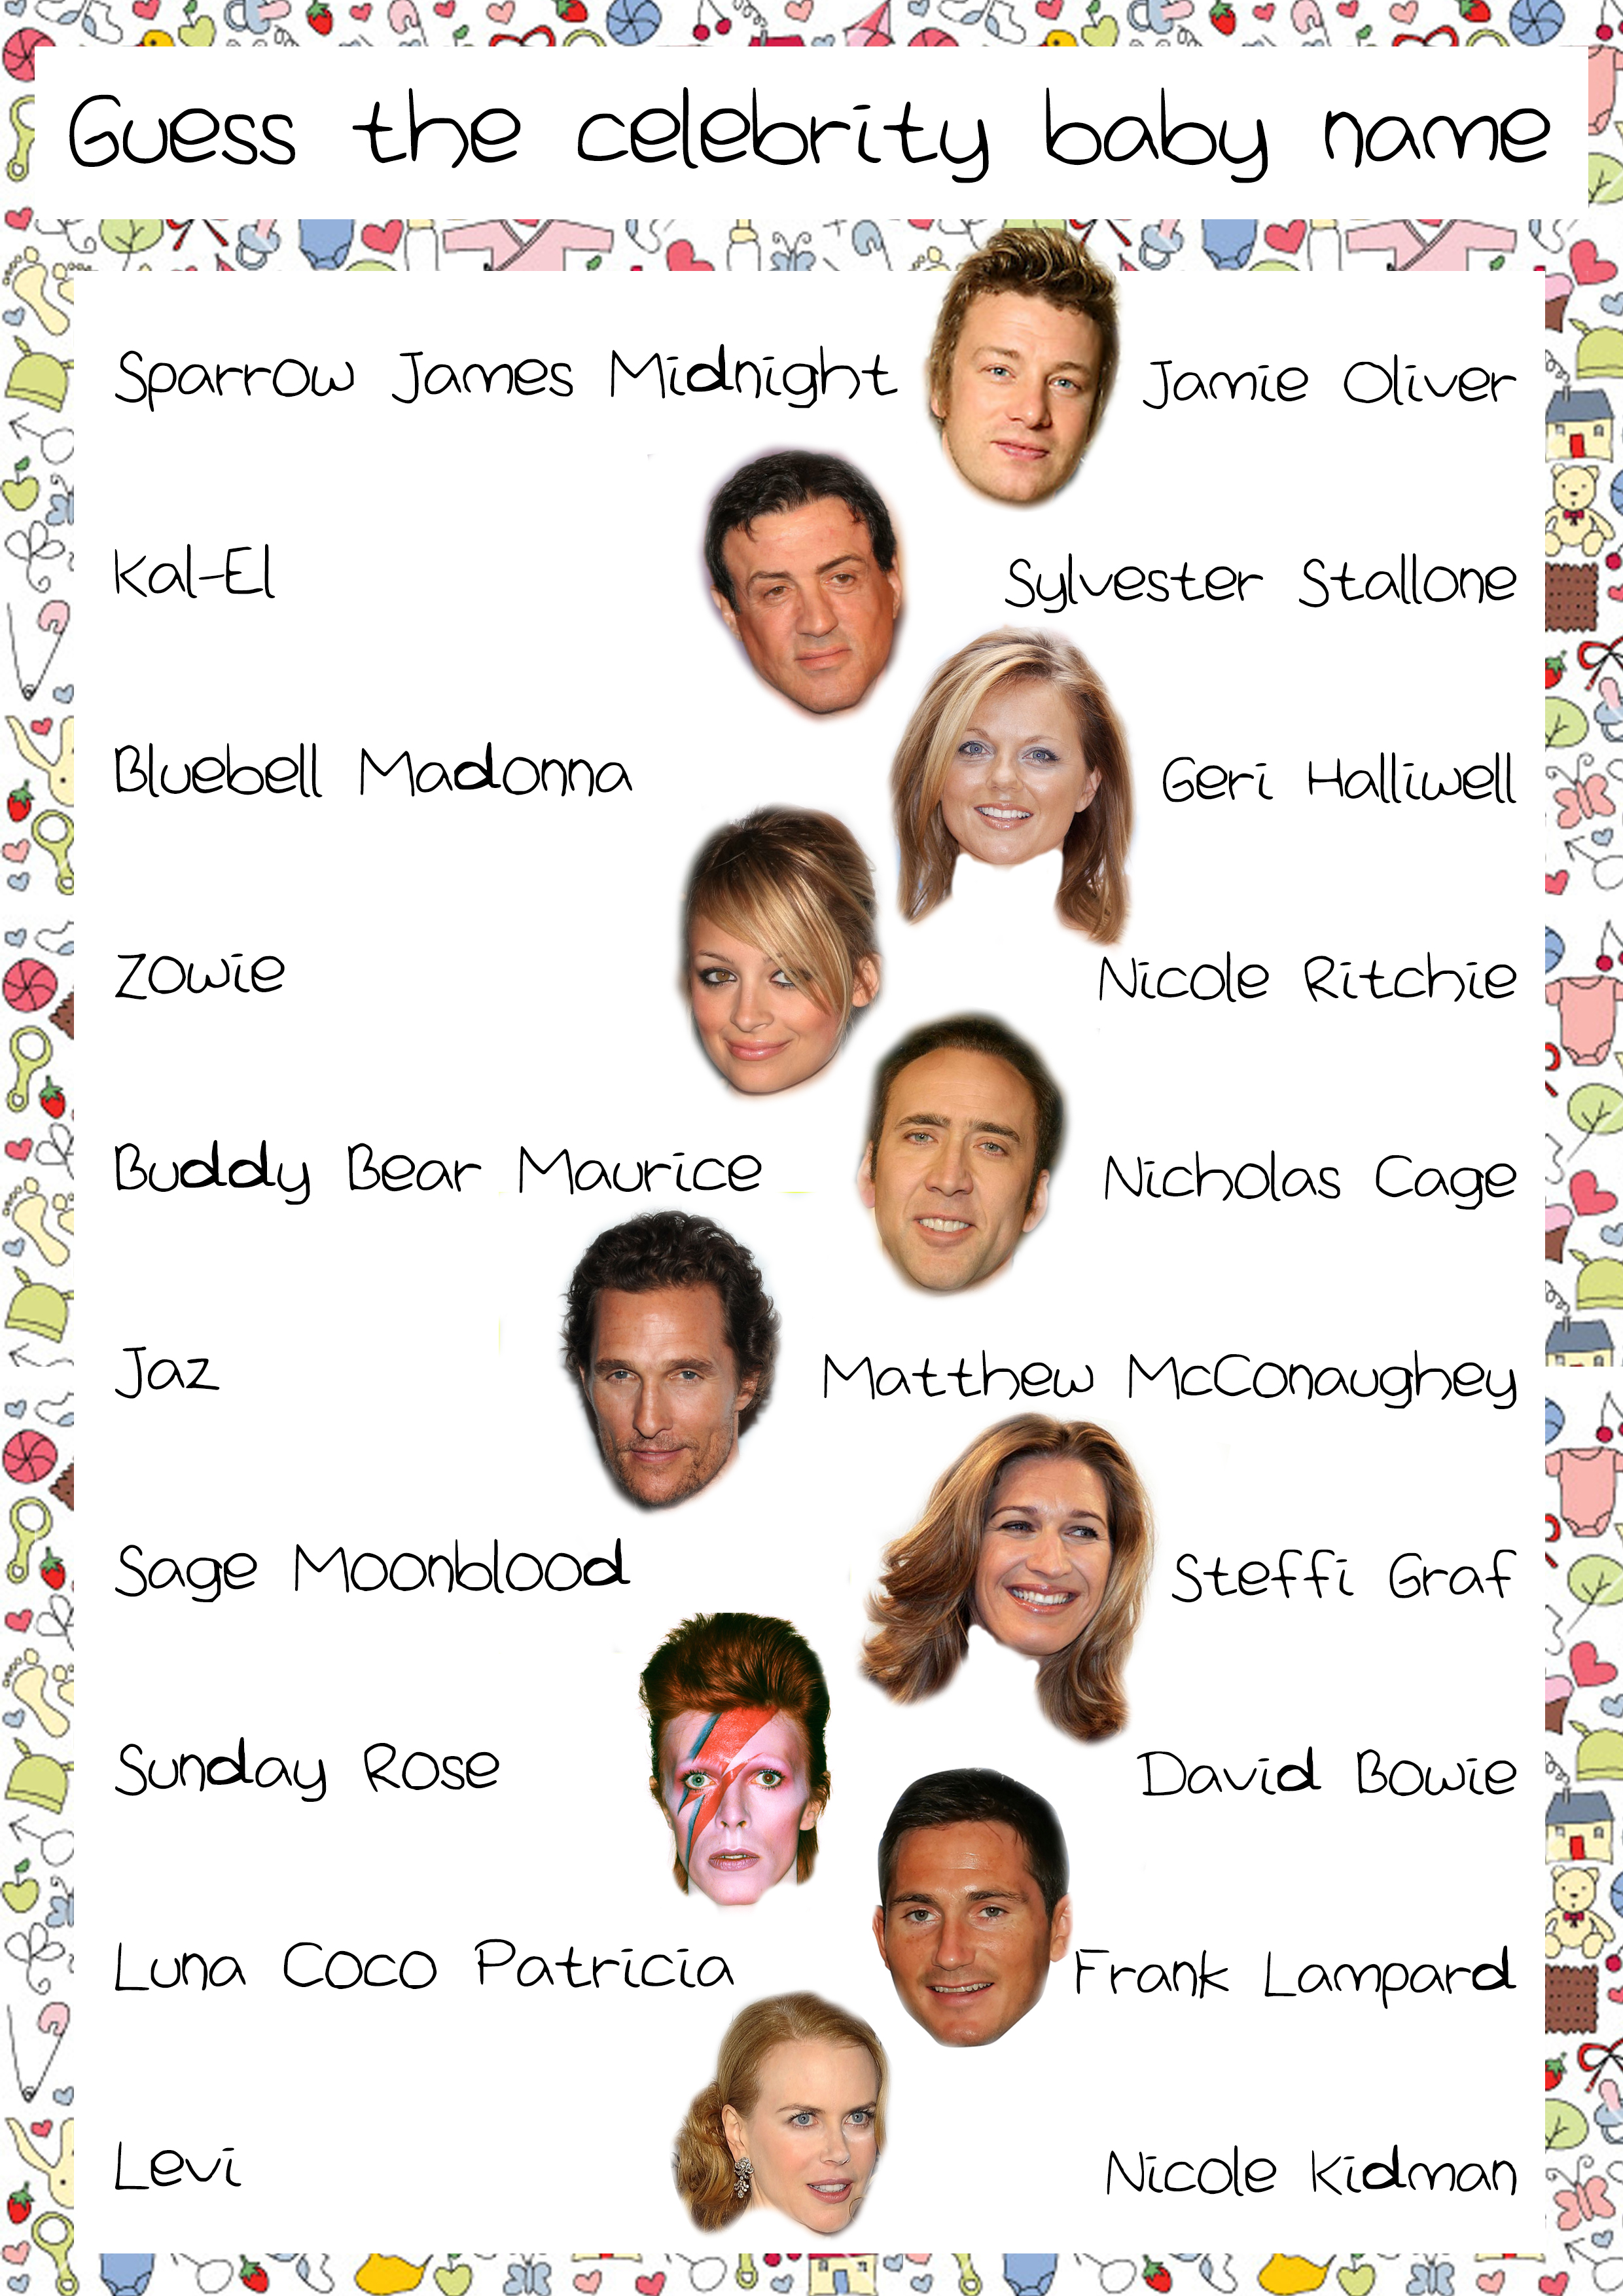 601 New baby shower game famous babies 87 Baby shower Celebrity baby names quiz 